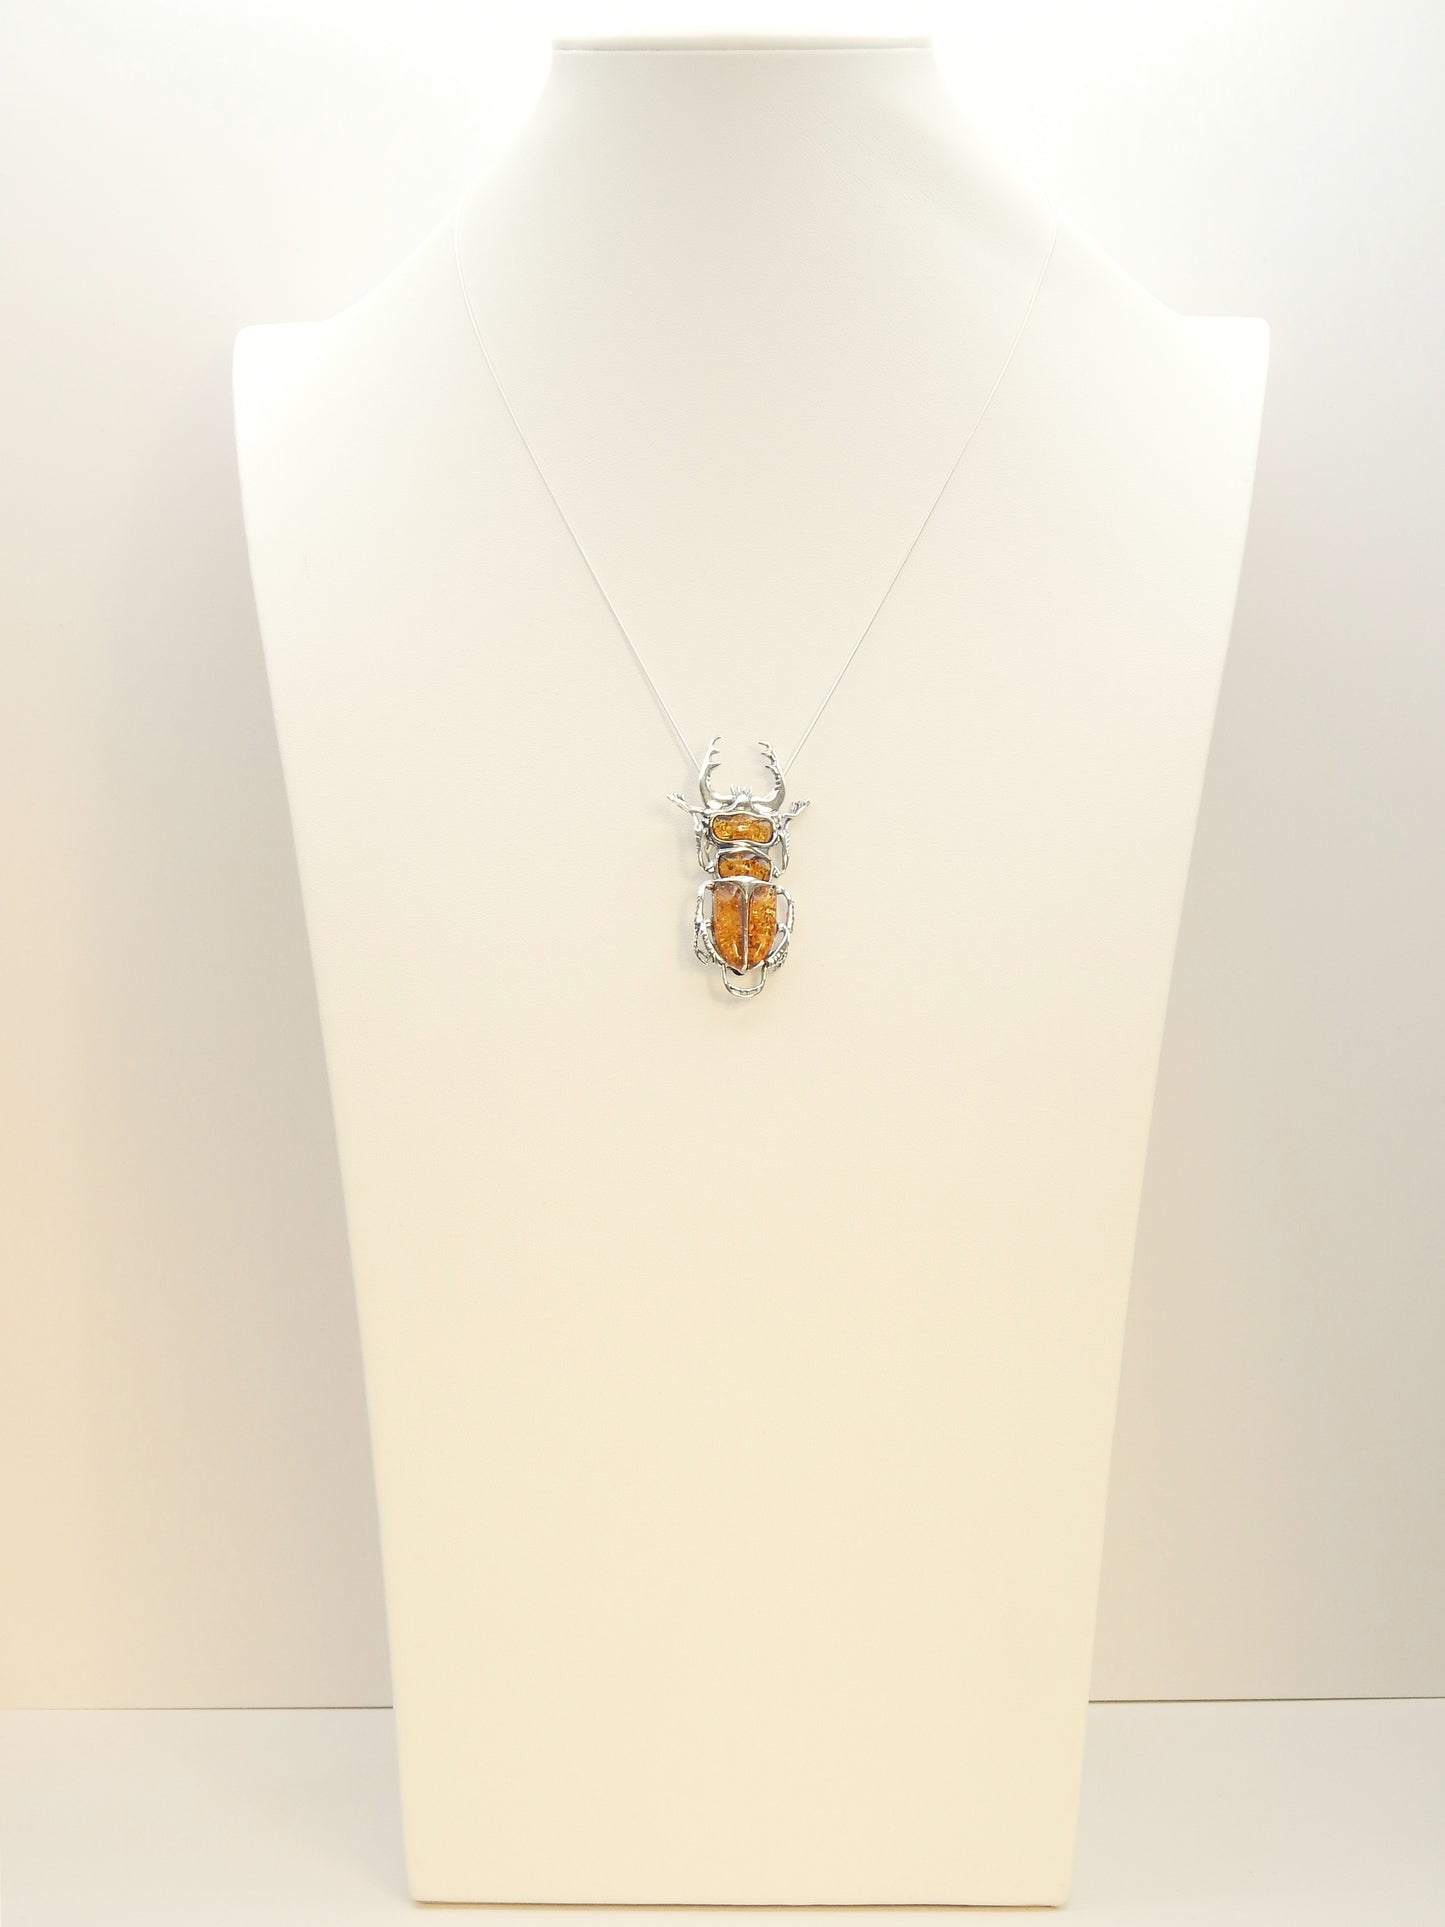 Natural Baltic Cognac Amber Scarab Pendant/ Brooch Necklace in 925 Sterling Silver